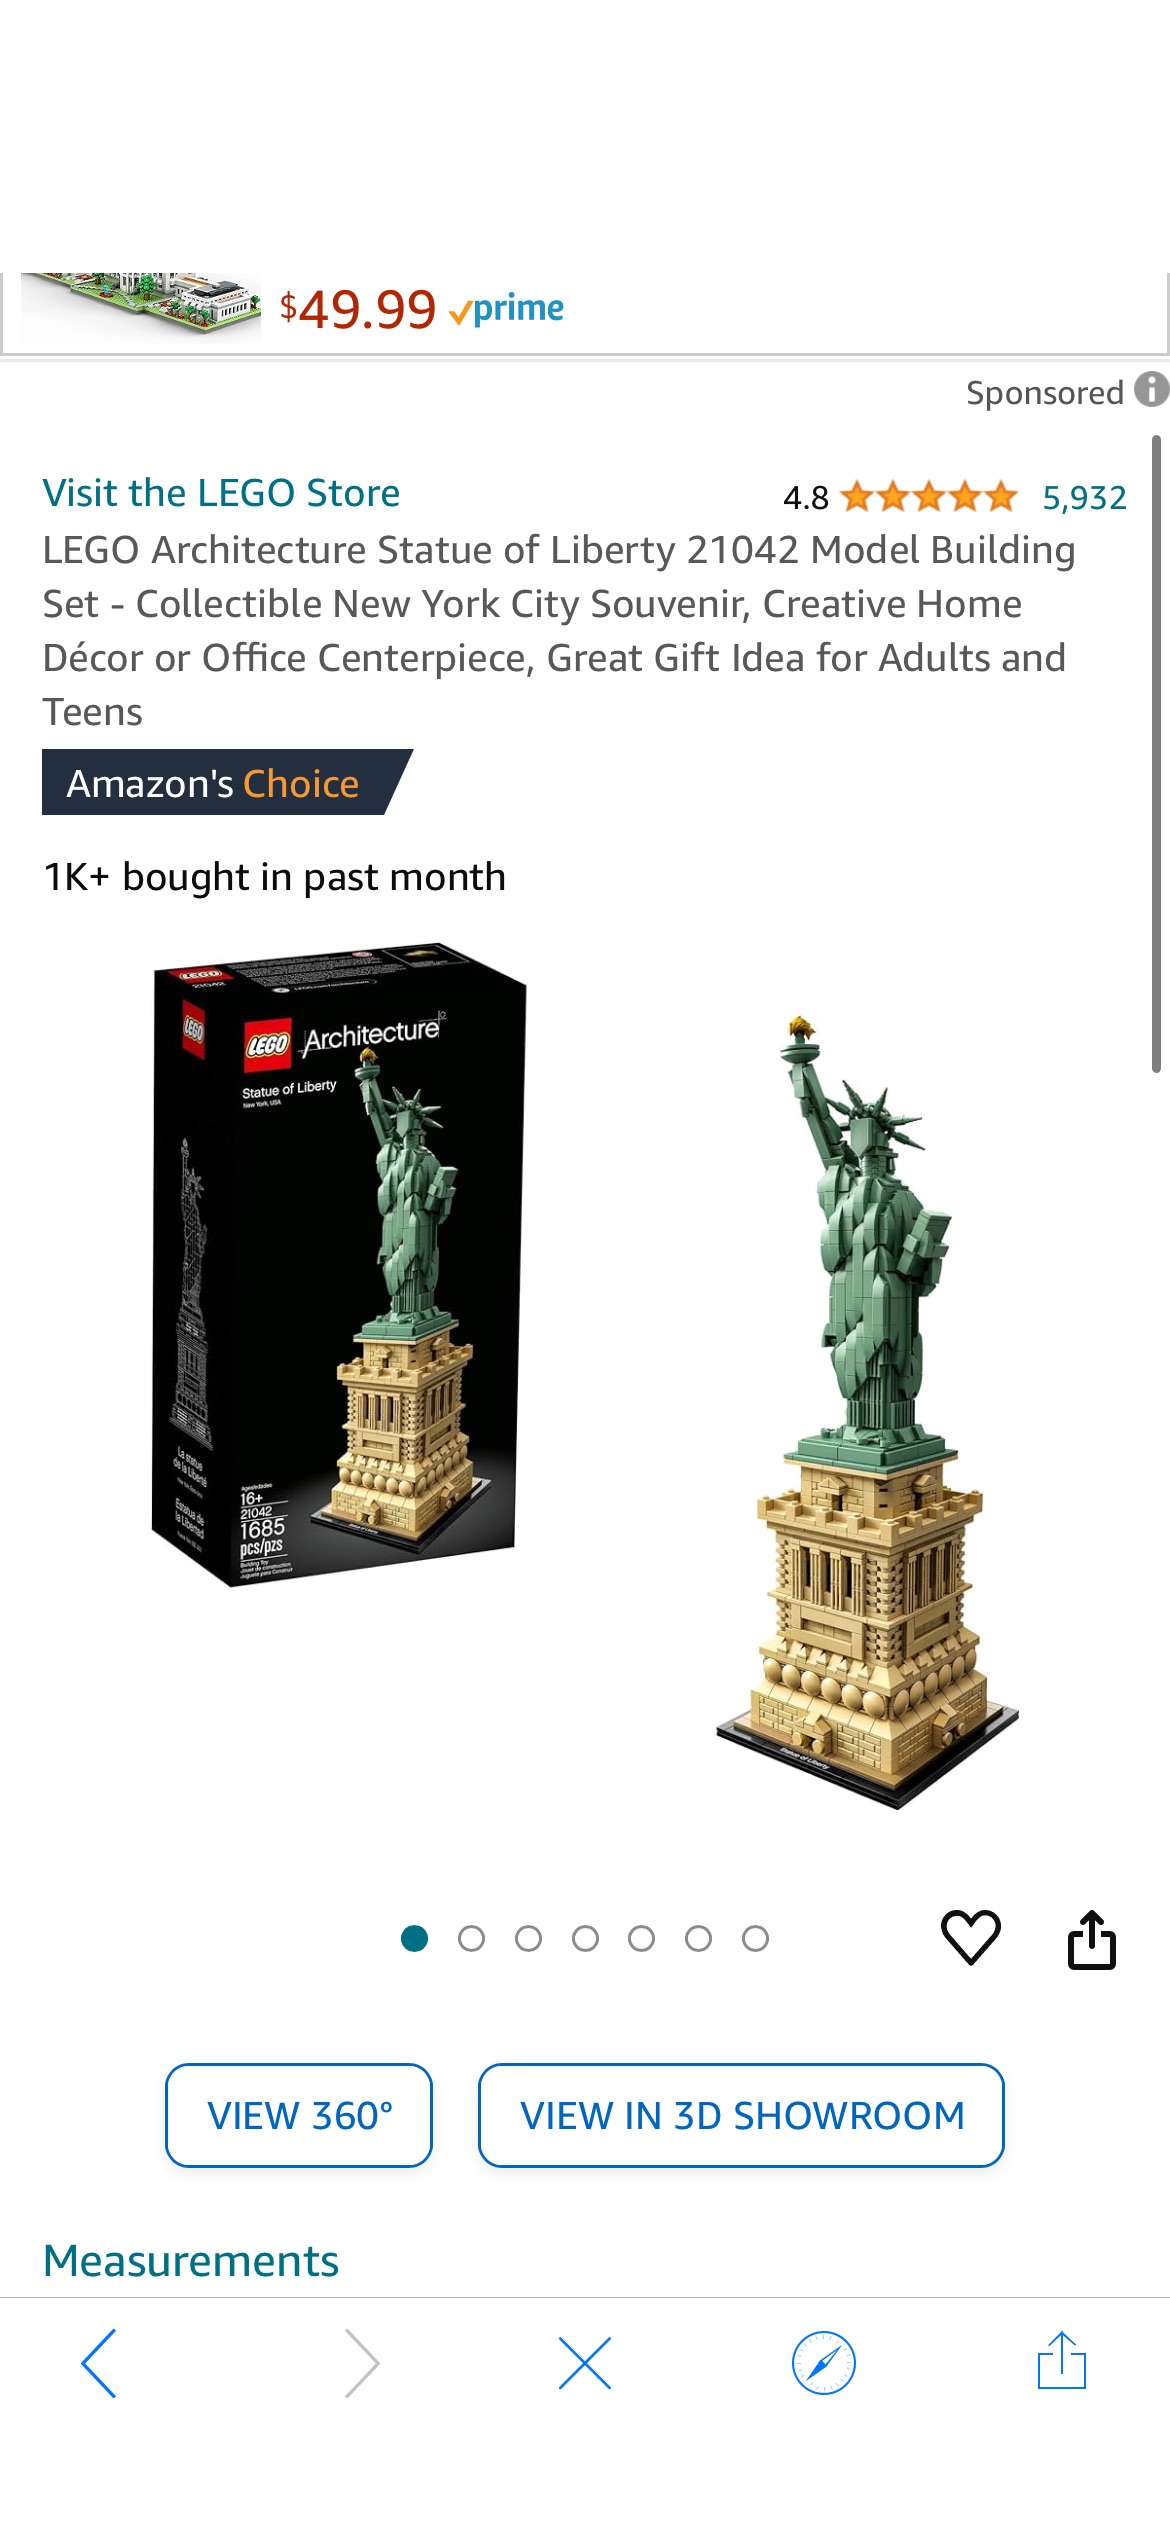 Amazon.com: LEGO Architecture Statue of Liberty 21042 Model Building Set - Collectible New York City Souvenir, Creative Home Décor or Office Centerpiece, Great Gift Idea for Adults and Teens : Toys & 